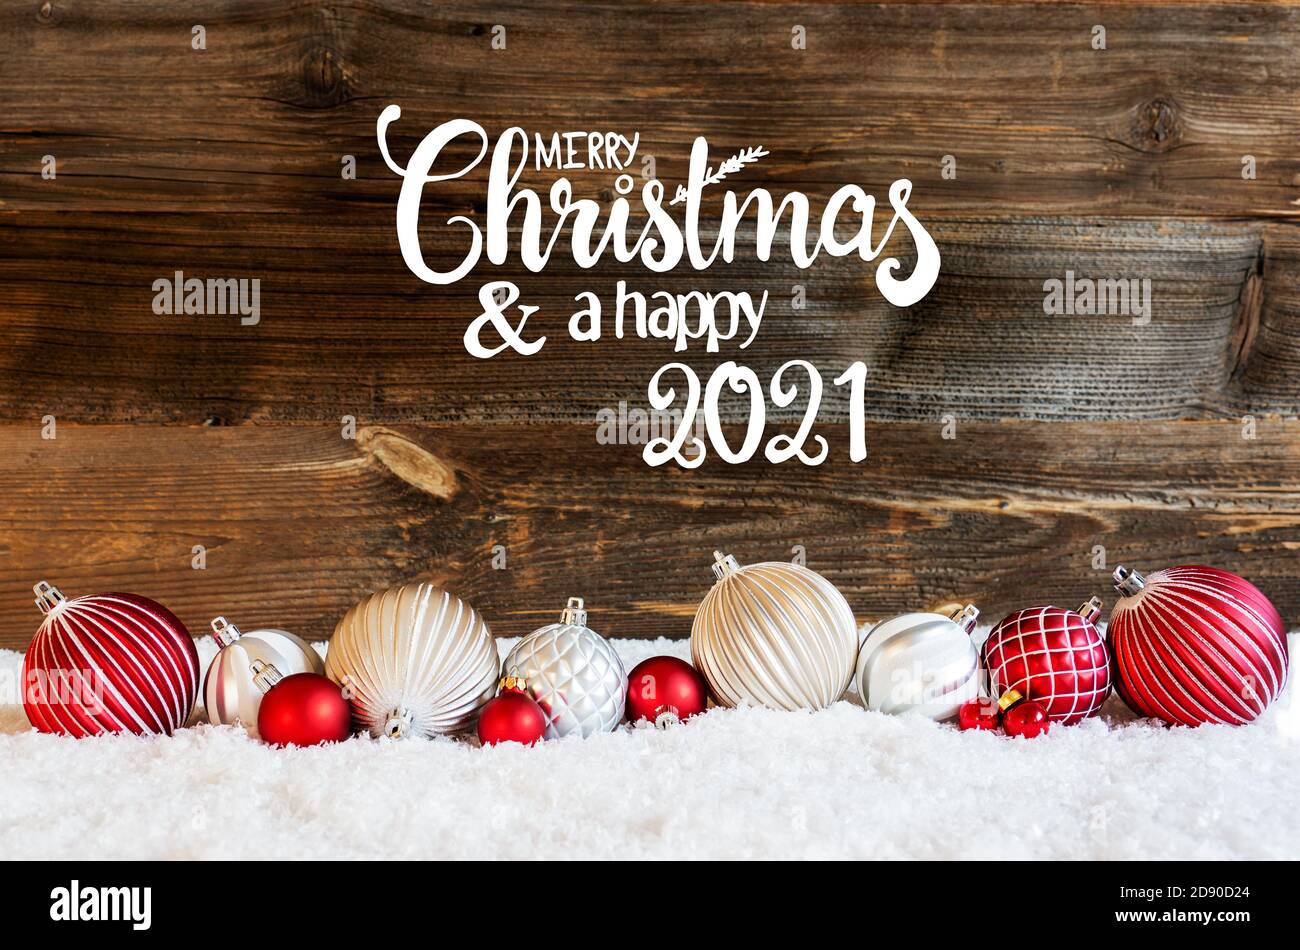 Christmas Ball Ornament, Snow, Calligraphy Merry Christmas And A Happy 2021 Stock Photo